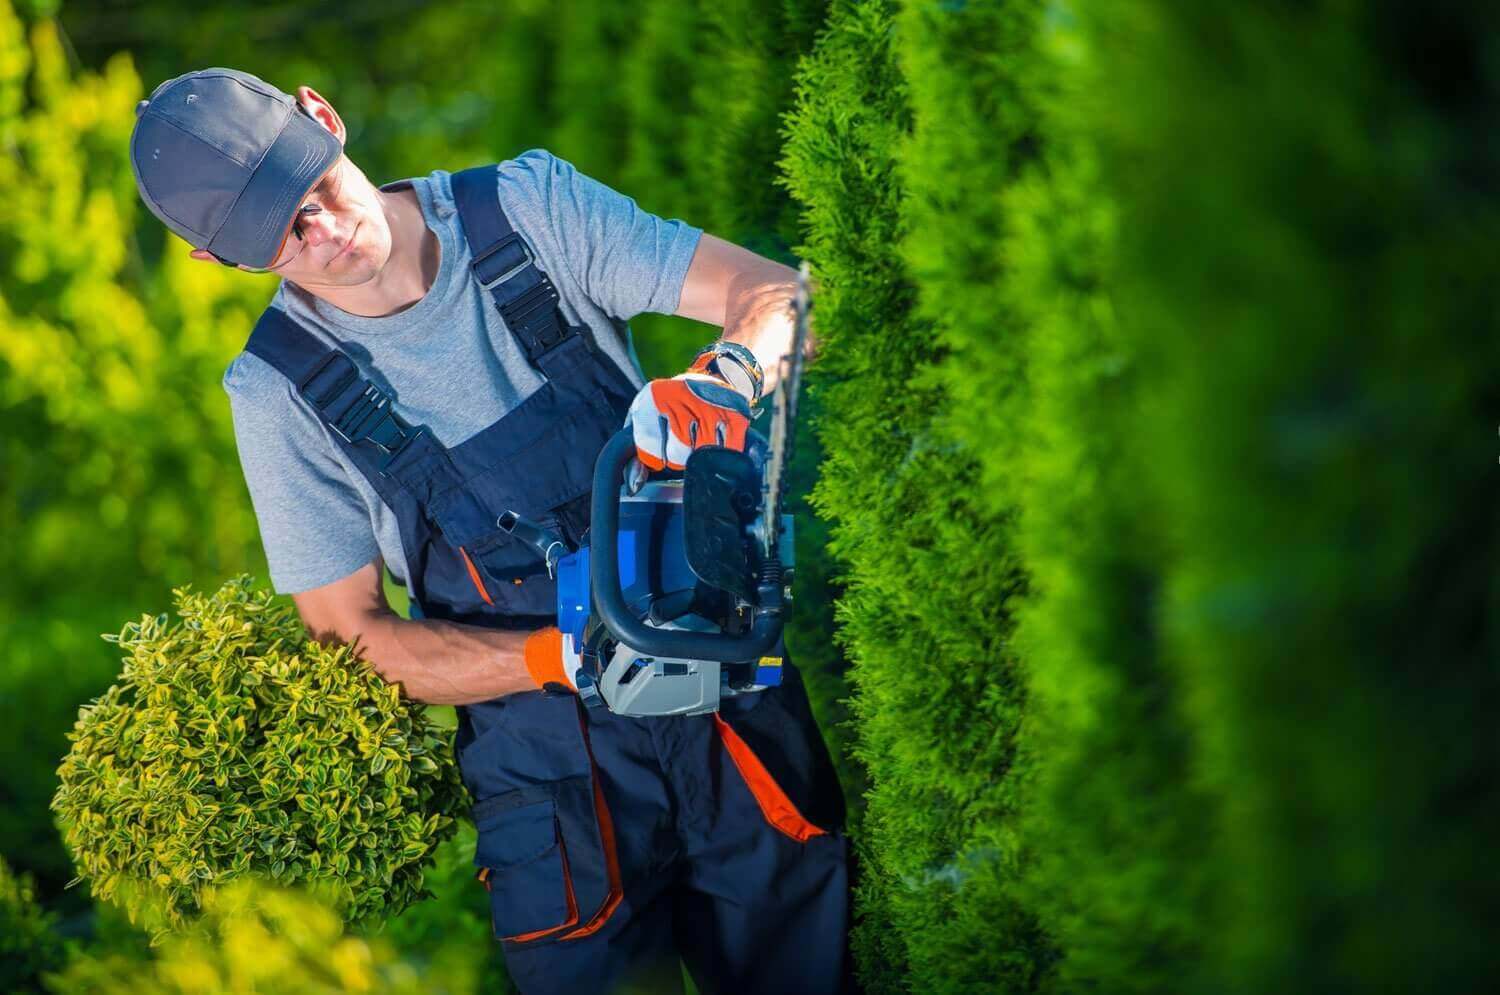 Man trimming a hedge outdoors using an electric hedge trimmer, wearing a cap, overalls, and gloves in a sunny garden.